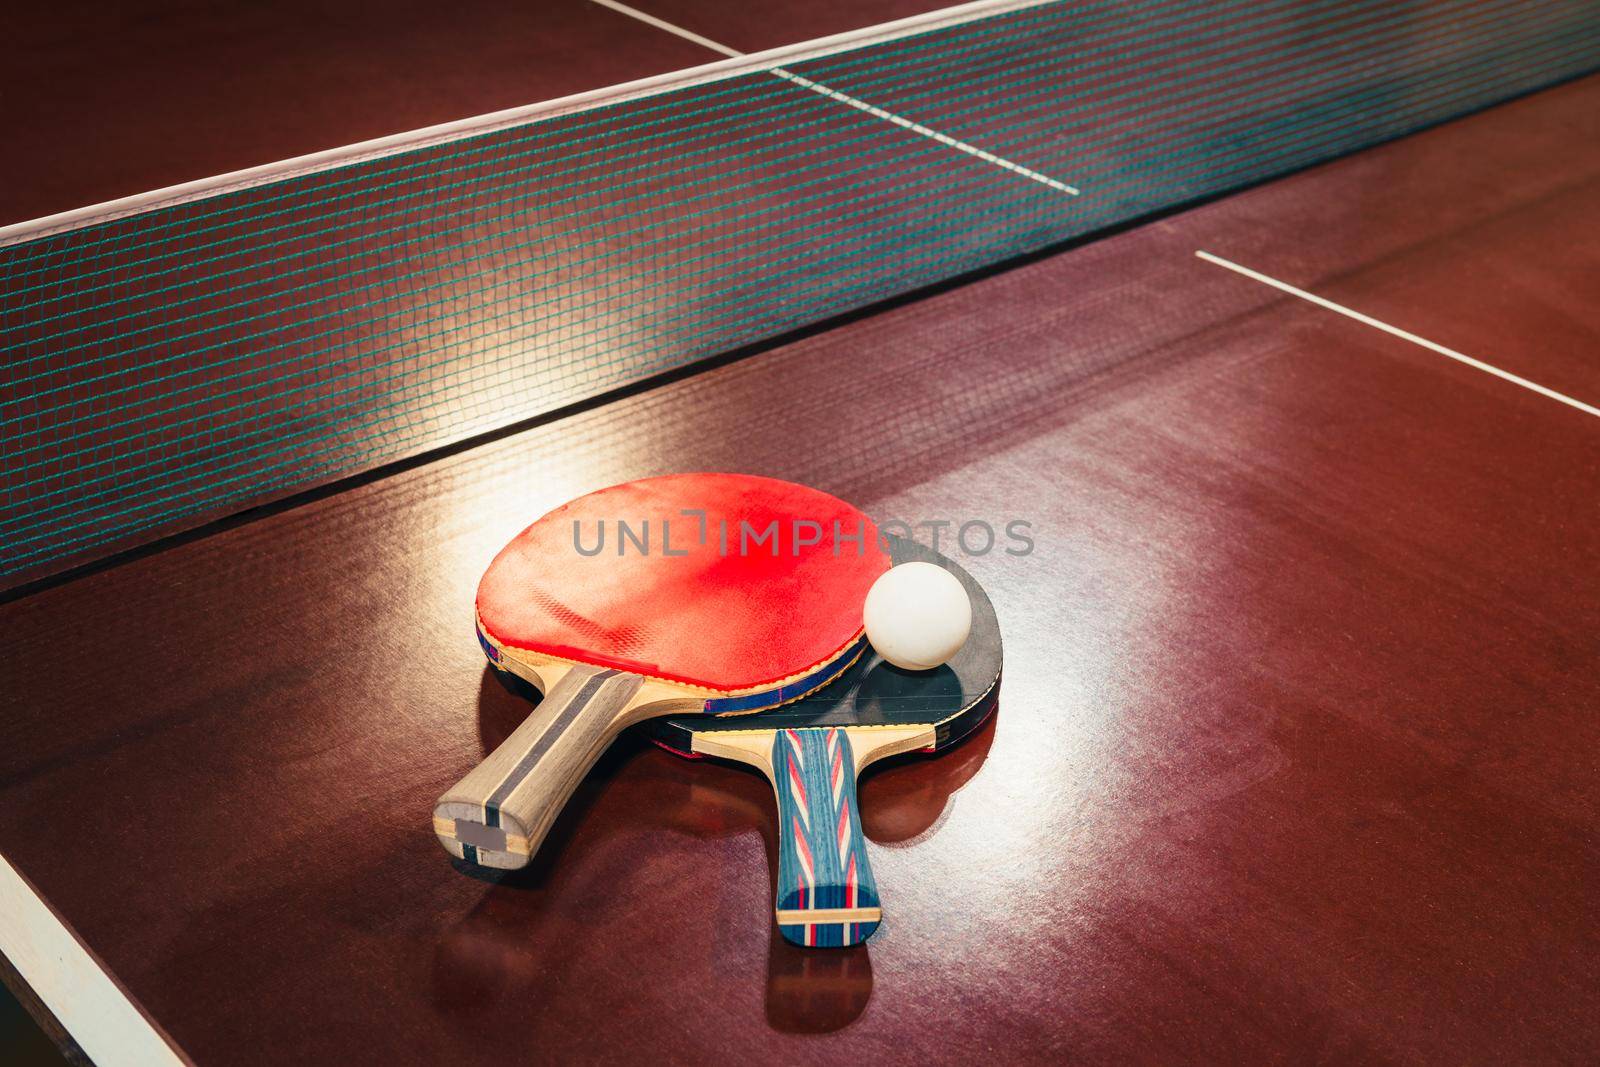 table tennis rackets and ball, net background